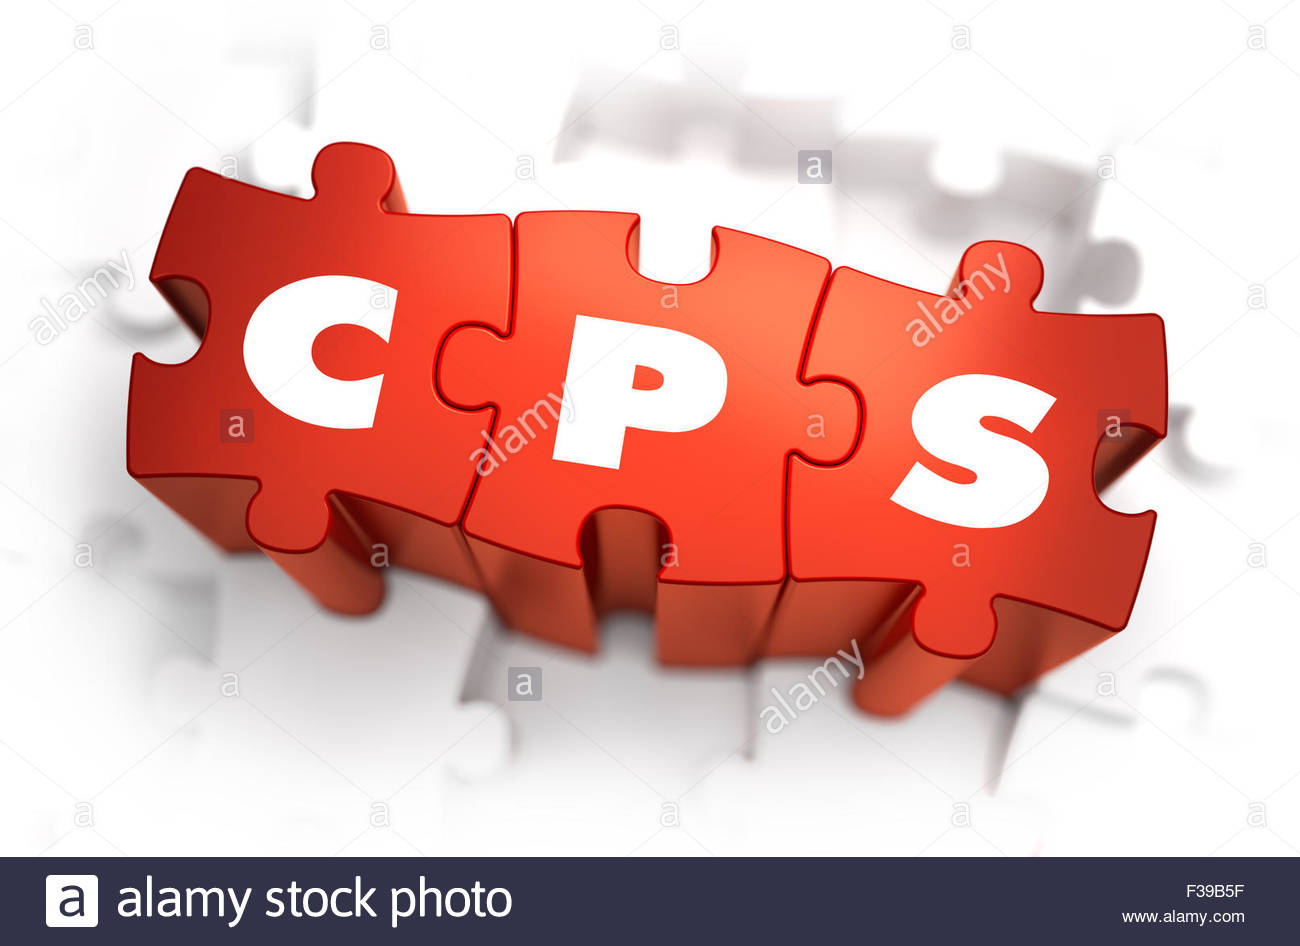 Cps Cost Per Sale White Word On Red Puzzles